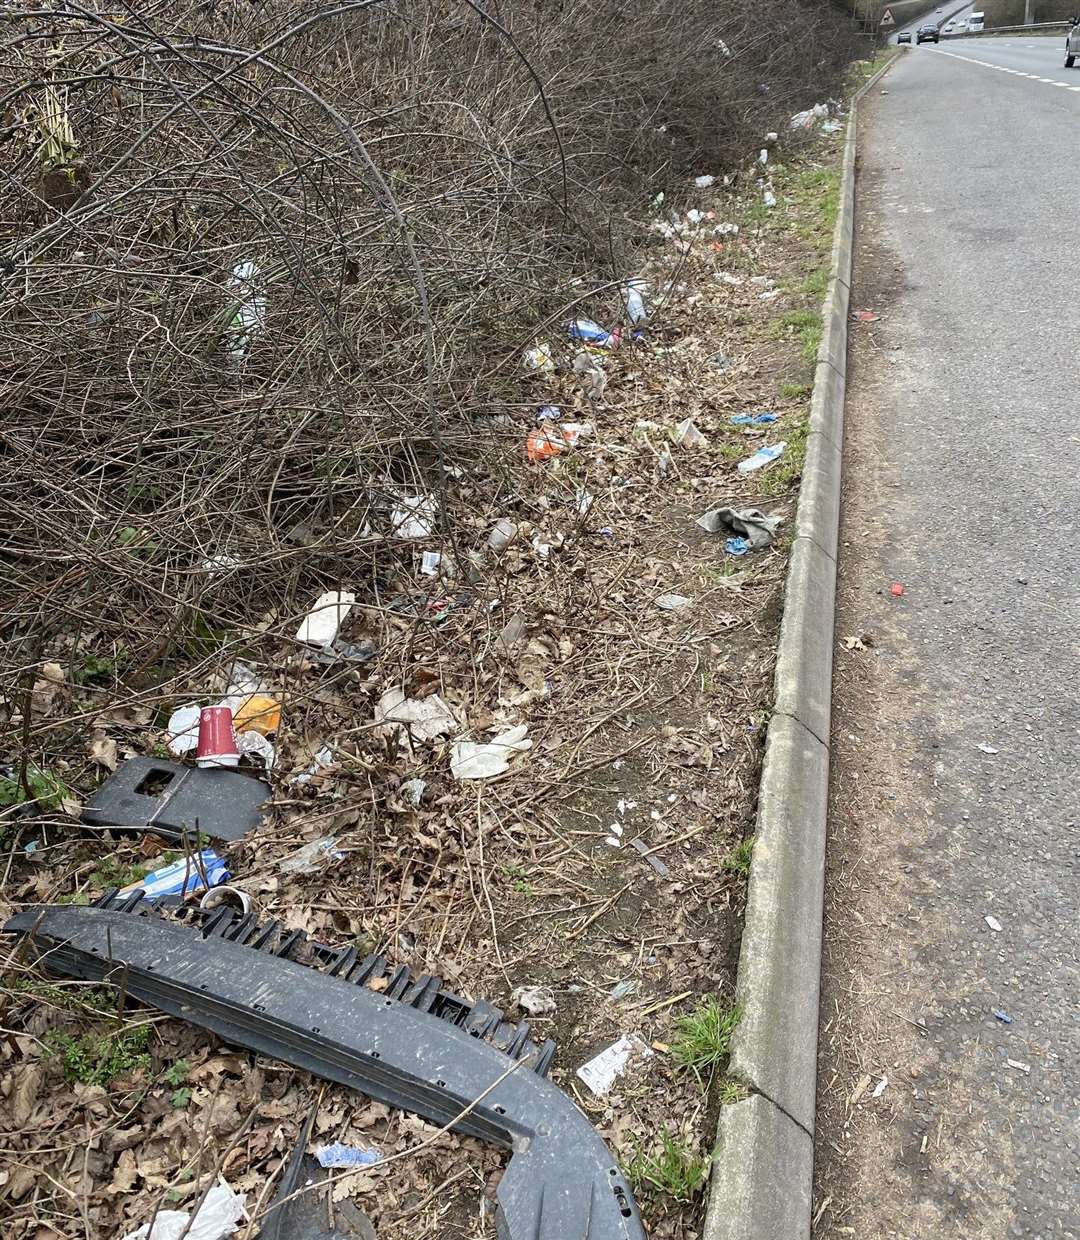 Laura said there were dead animals lying along the A21. Picture: Laura Collins